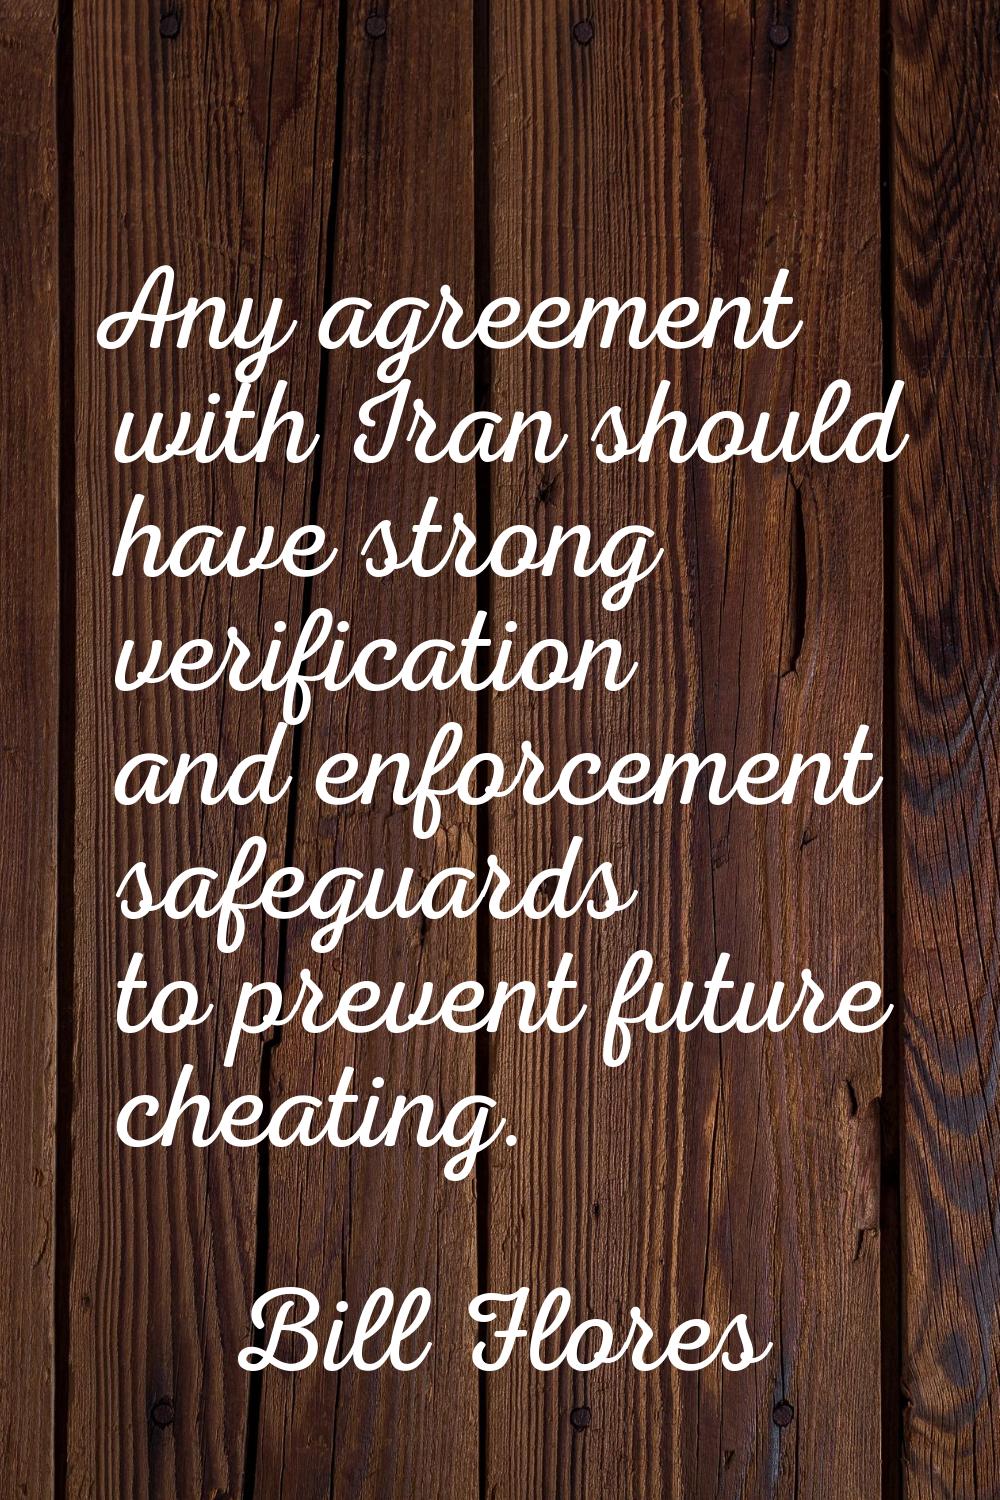 Any agreement with Iran should have strong verification and enforcement safeguards to prevent futur